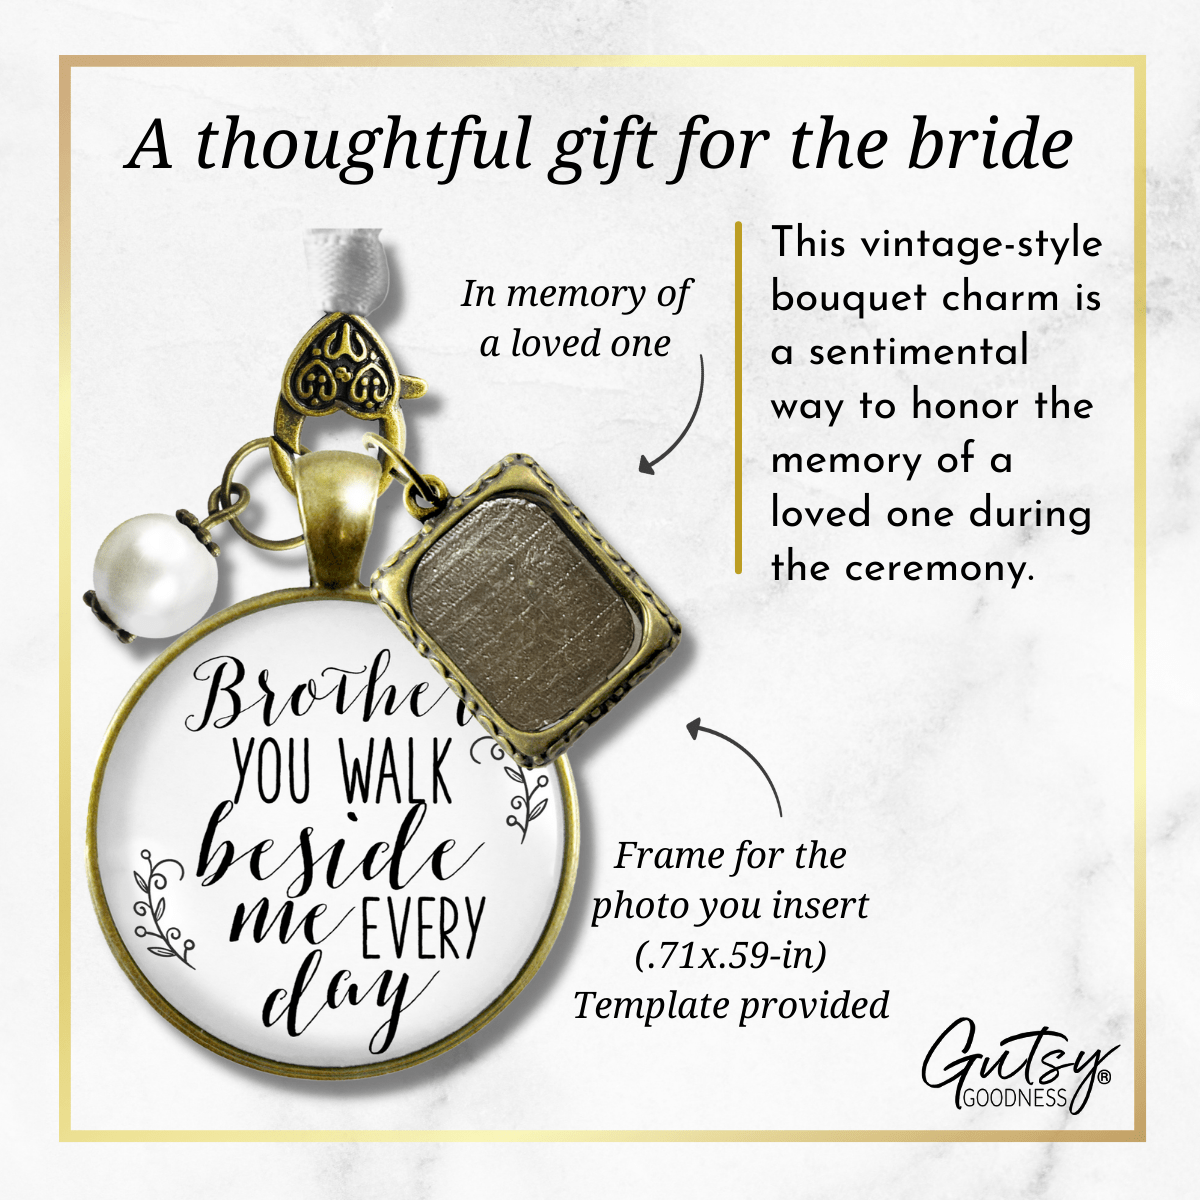 Bridal Bouquet Photo Charm Brother Beside White Wedding Memorial Picture Frame Jewel - Gutsy Goodness Handmade Jewelry Gifts